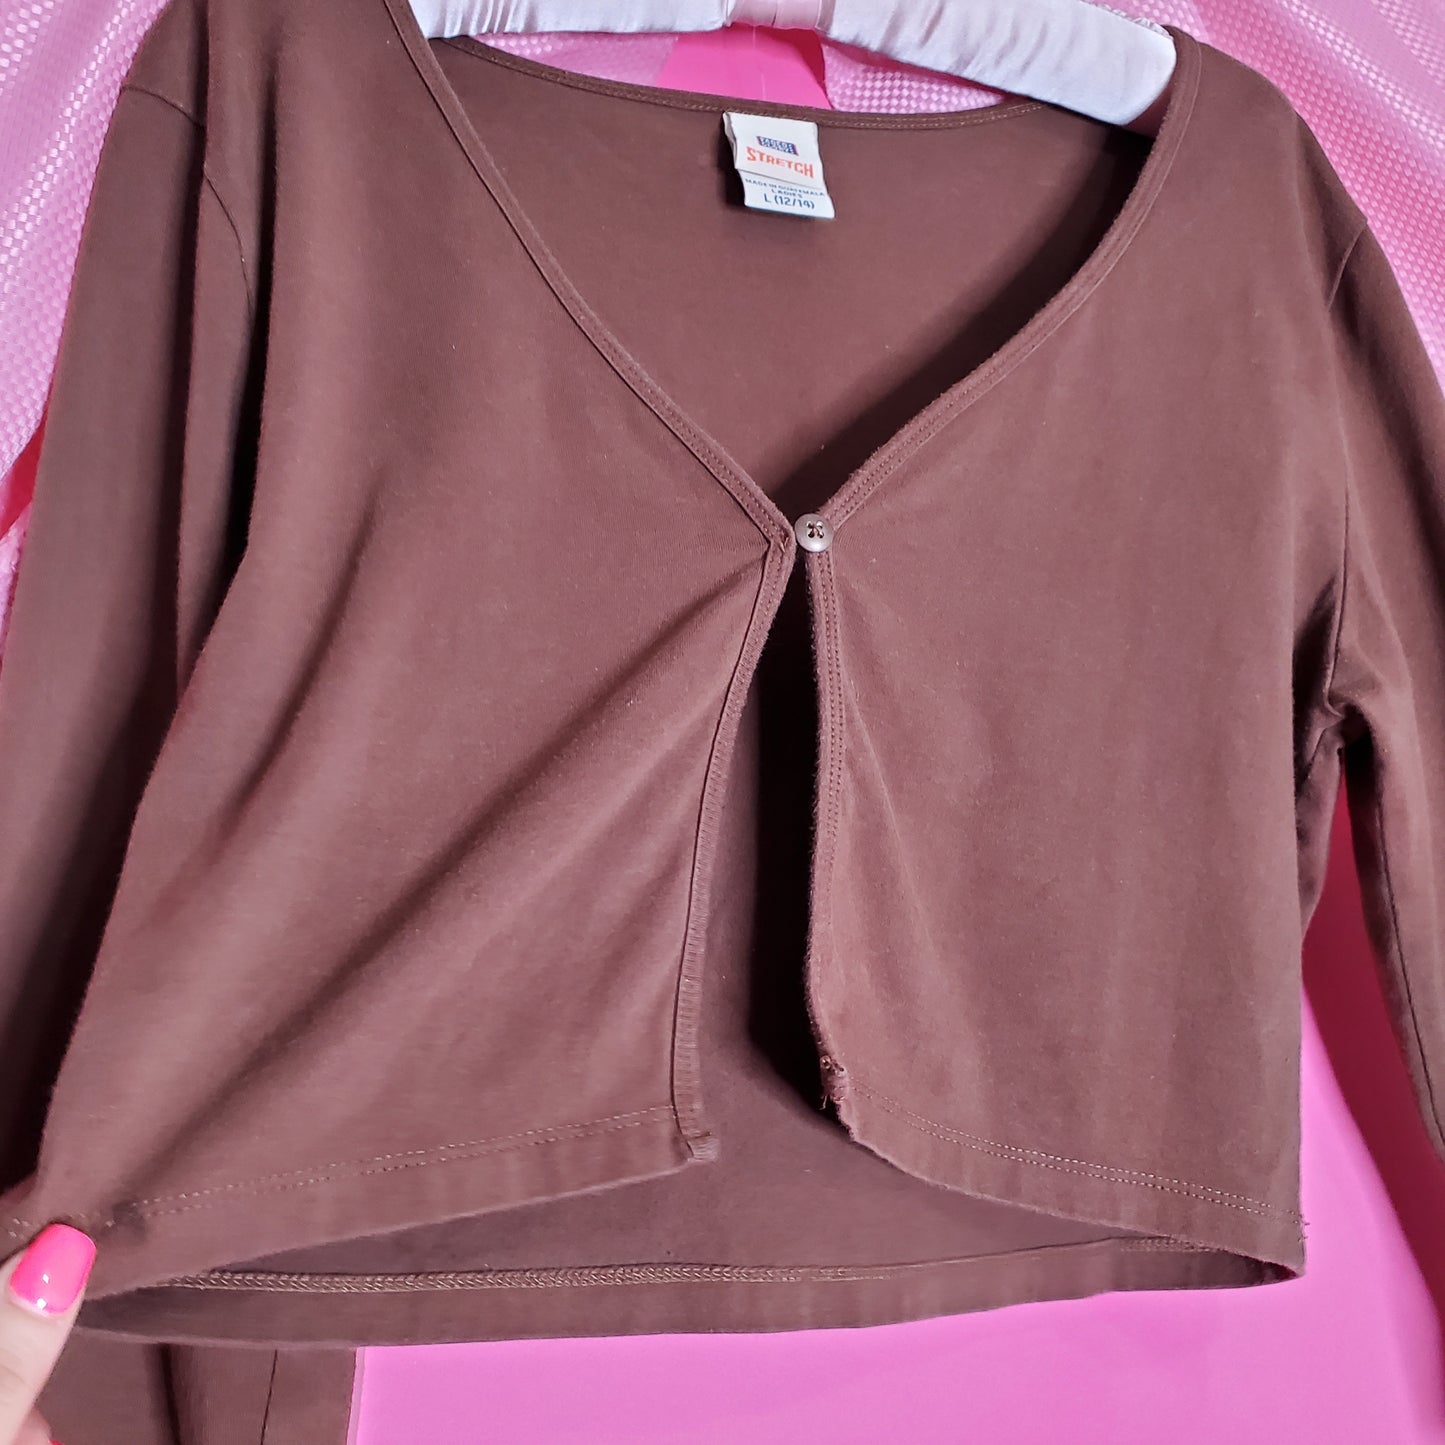 Brown cover up cardigan